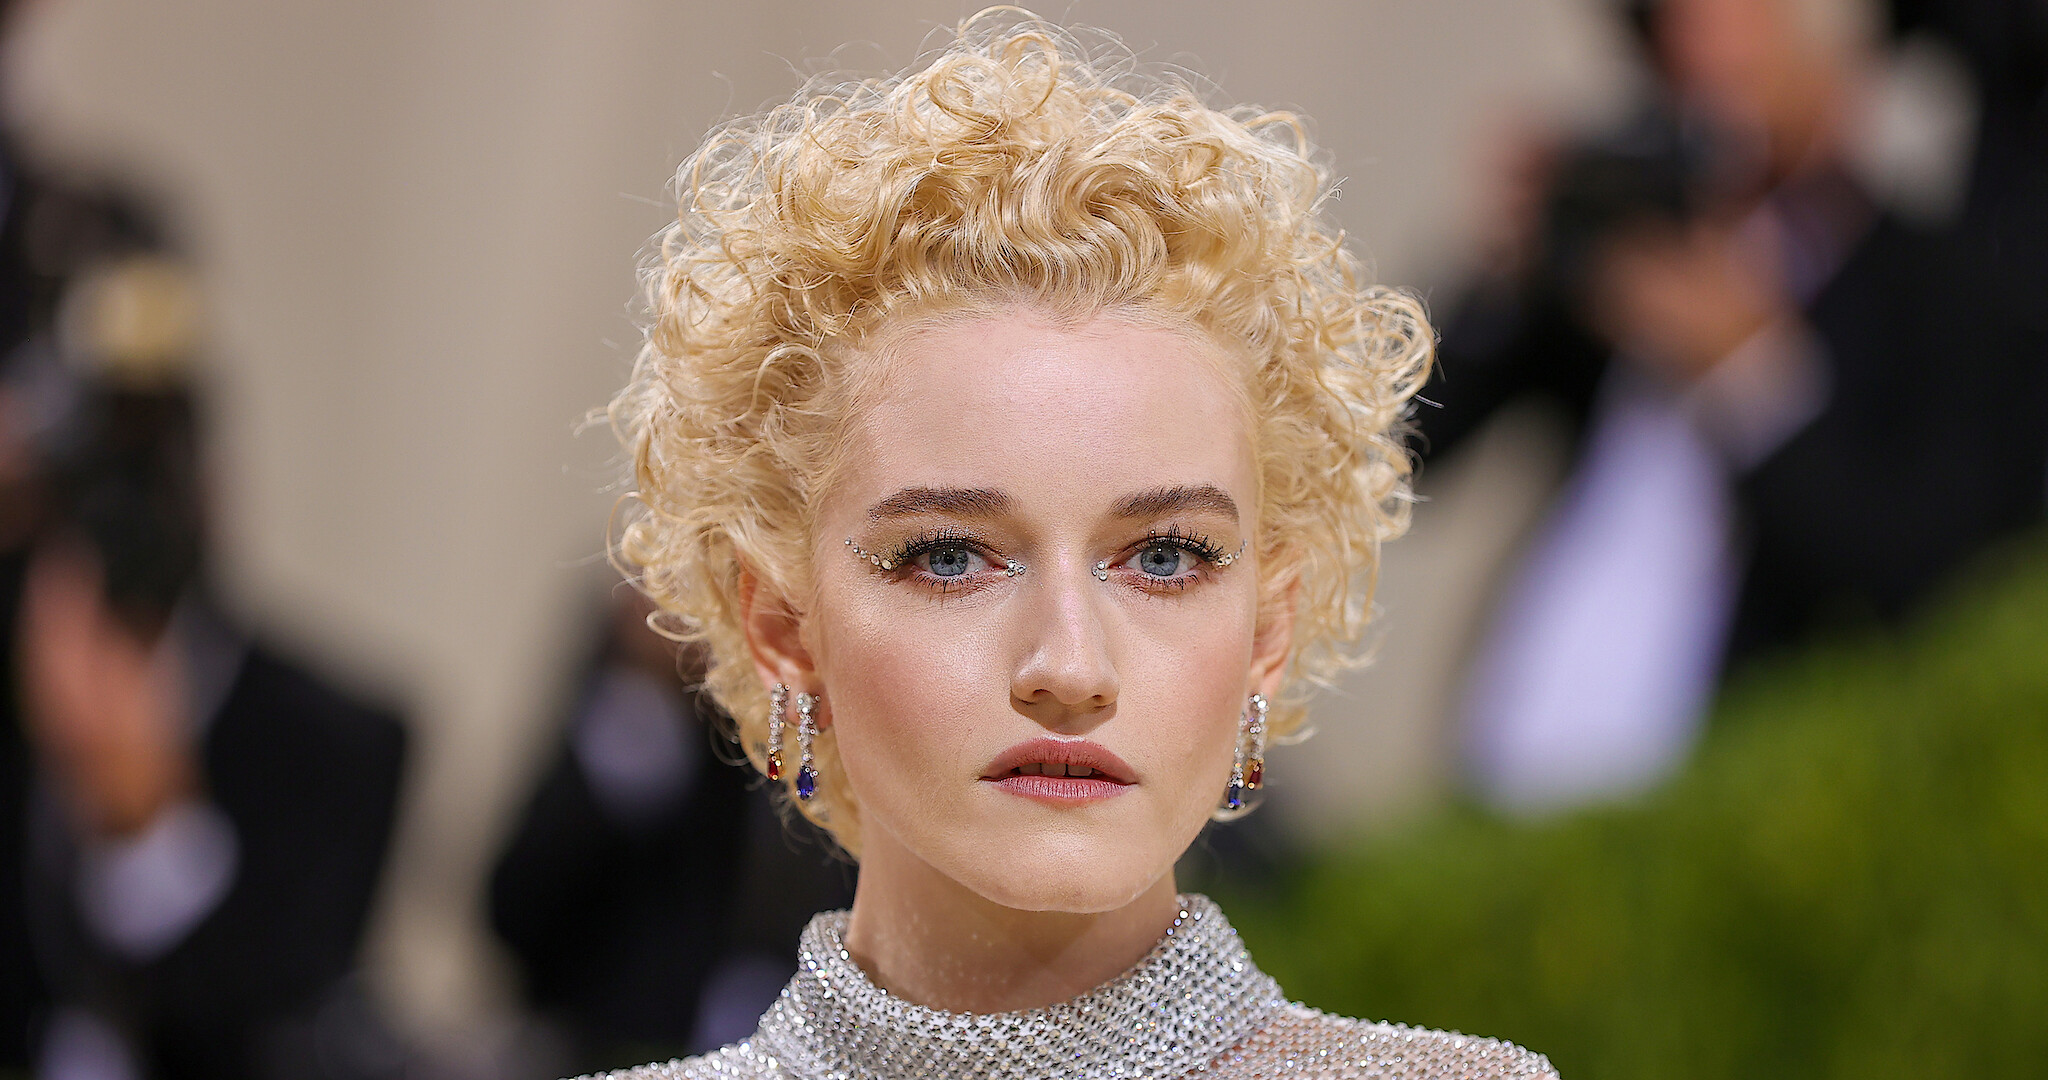 5 Julia Garner TV Shows and Movies to Stream picture